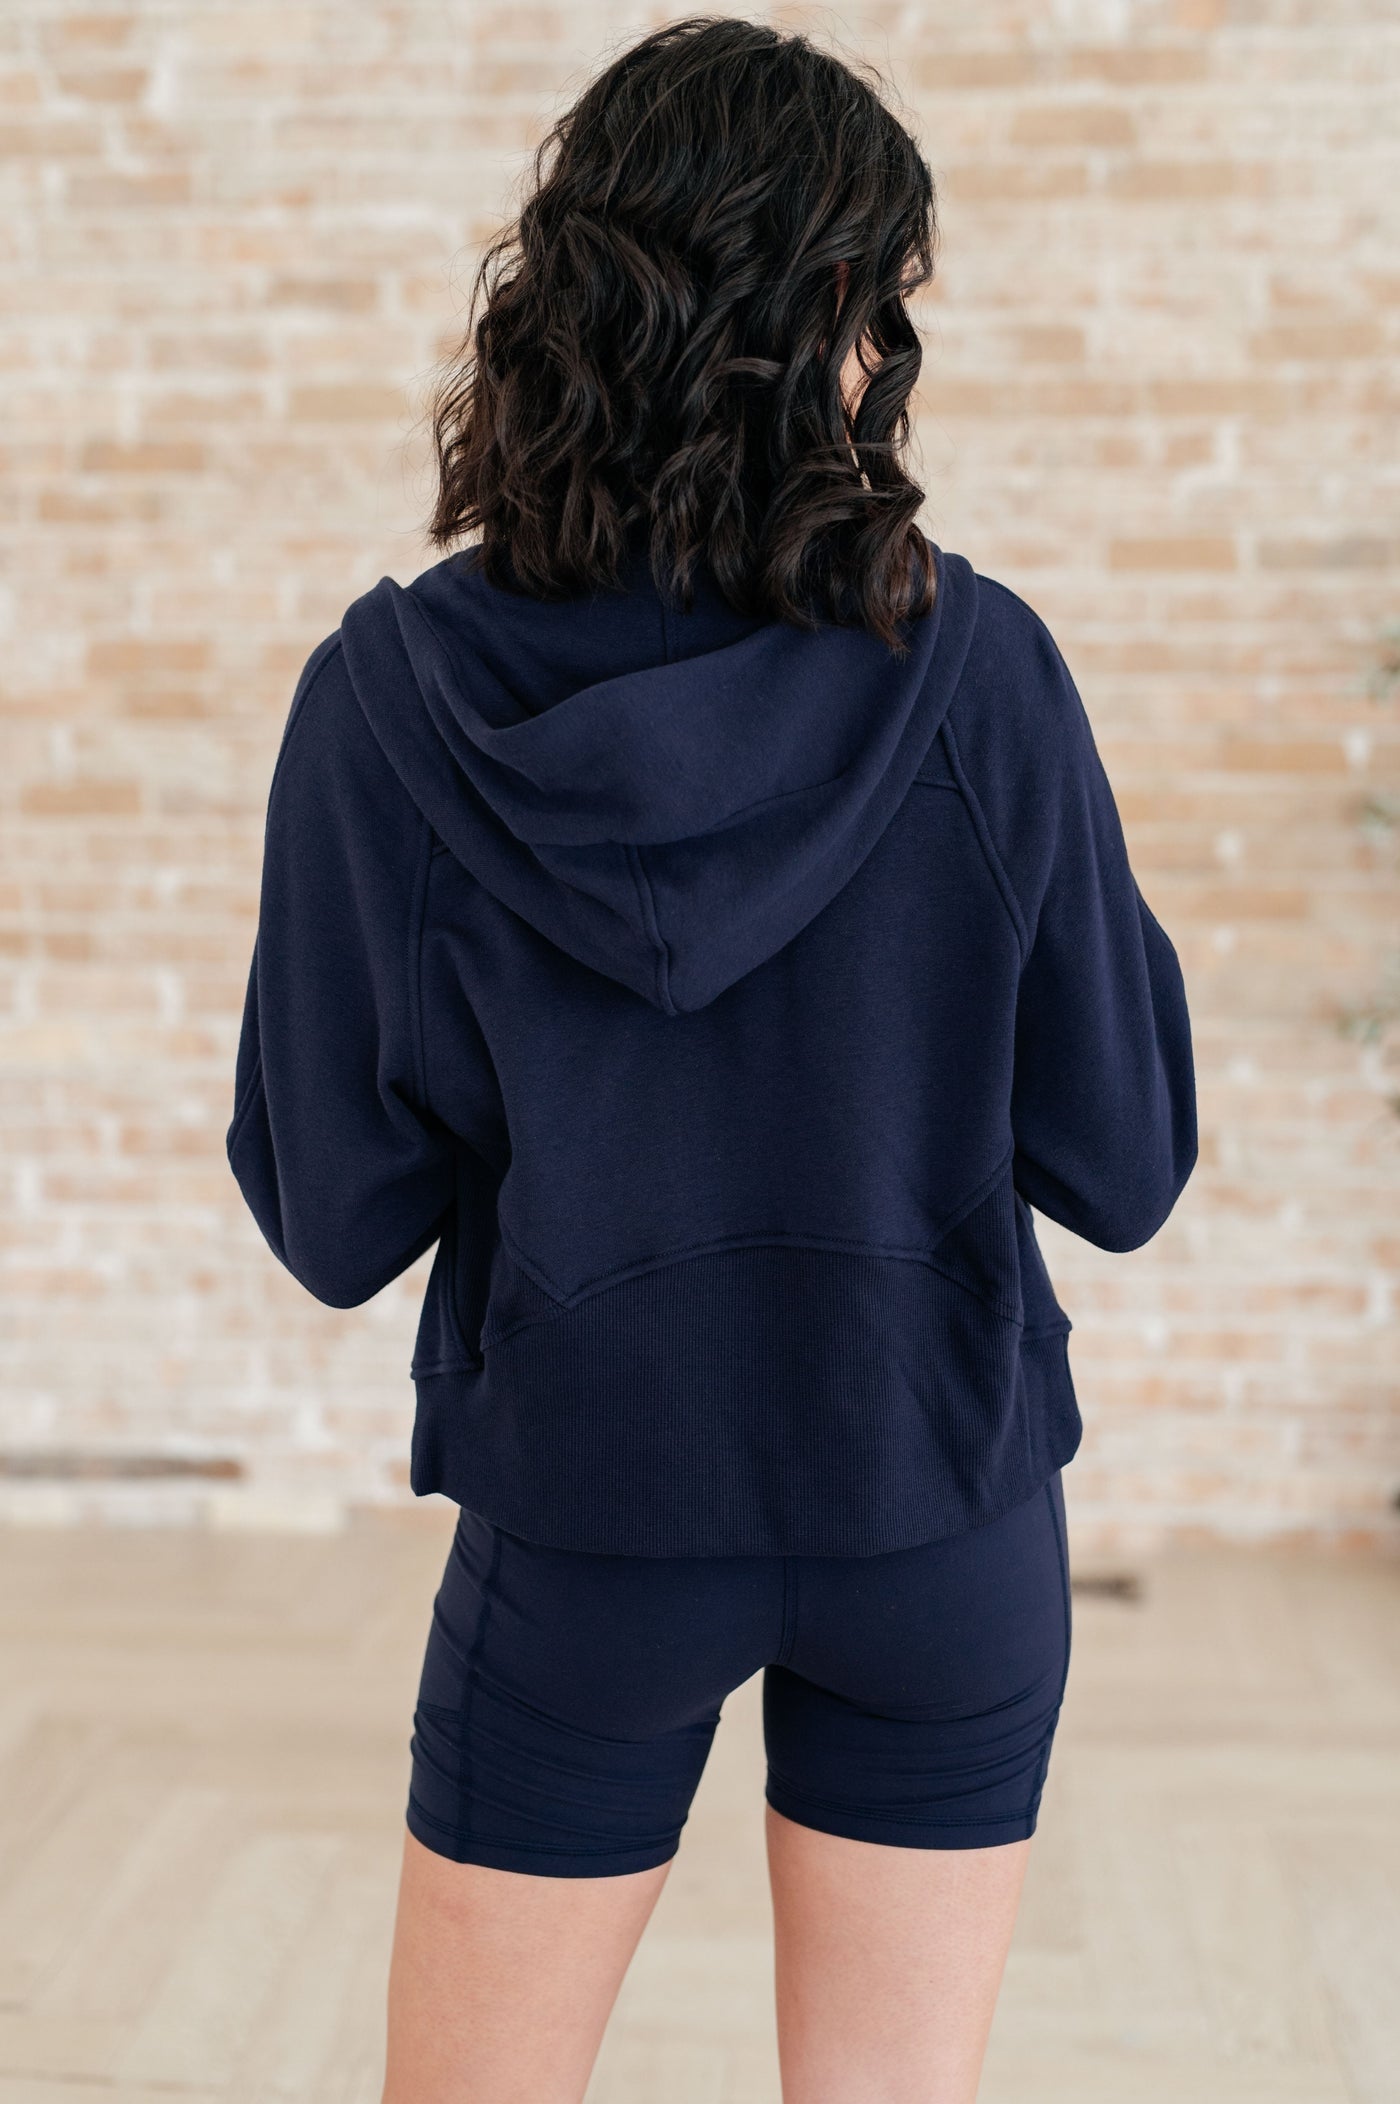 Sun or Shade Zip Up Jacket in Navy Southern Soul Collectives